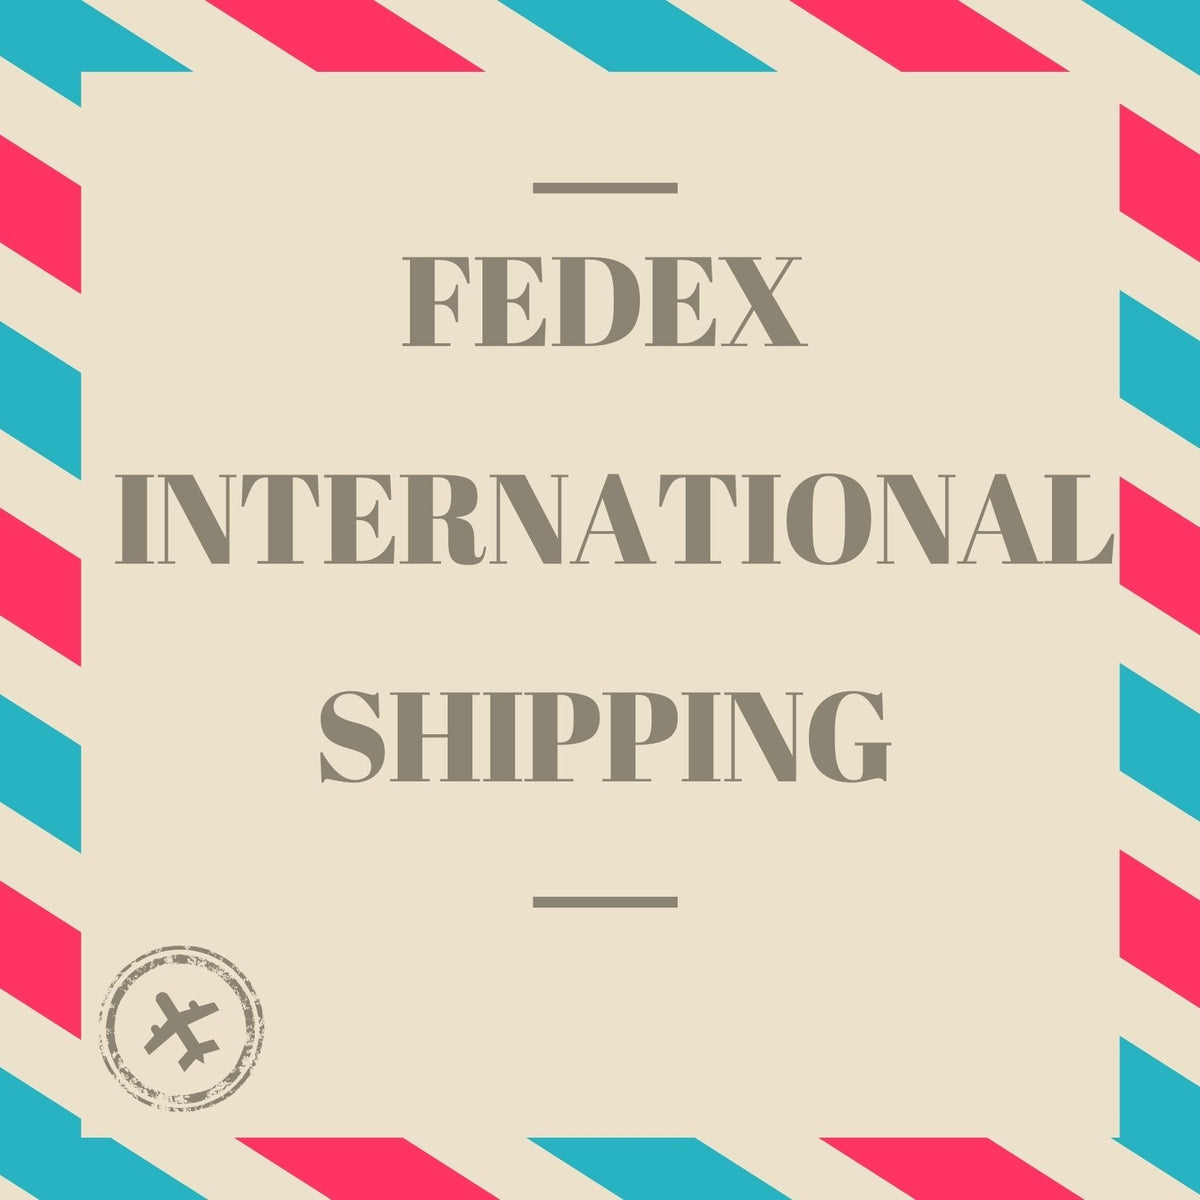 FedEx International Shipping (post purchase) - Delivery usually about 2-5 business days - Celtic Jewelscapes